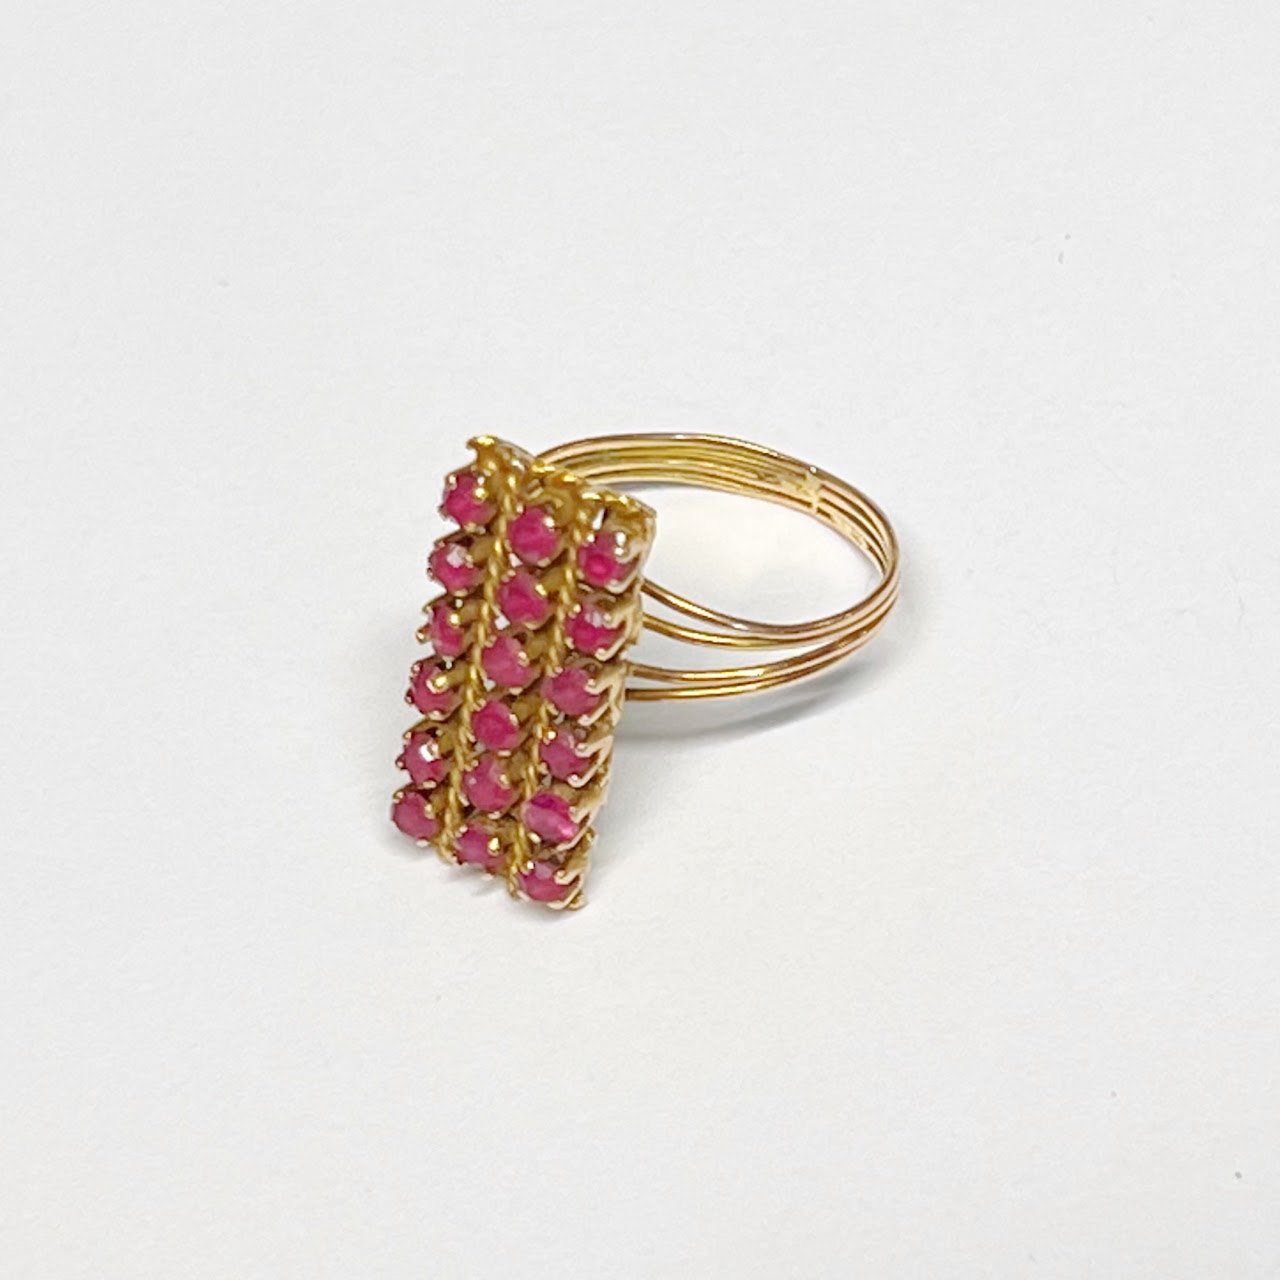 14K Gold Ring with 18 Cut Crystals